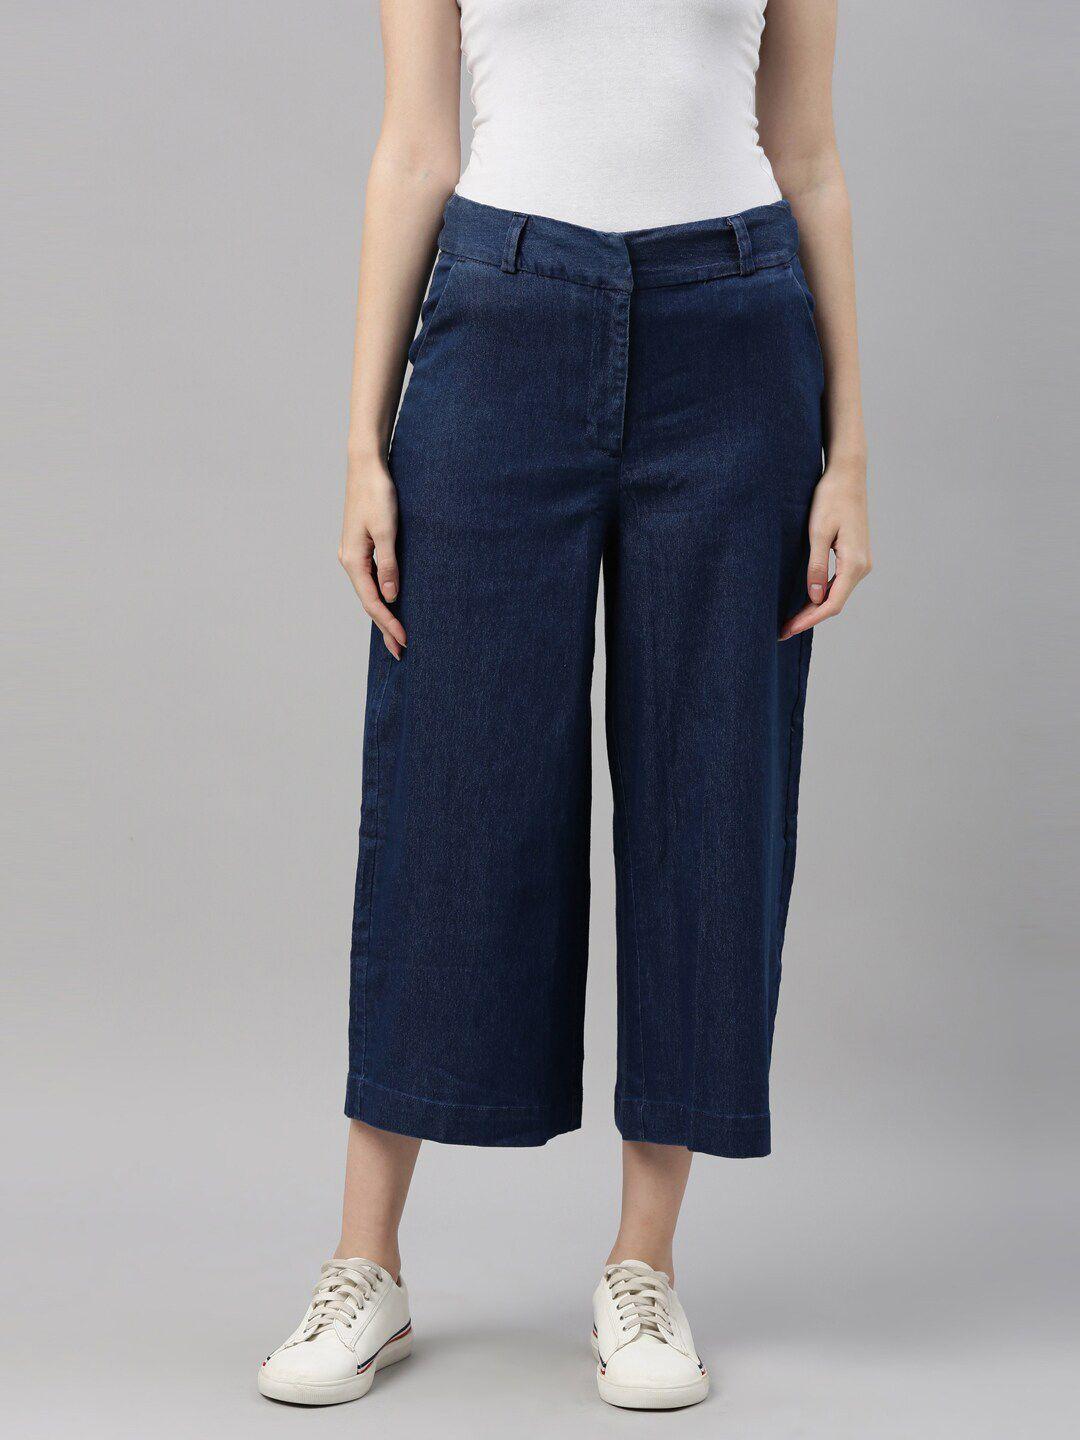 go colors women blue loose fit chambray culottes trousers